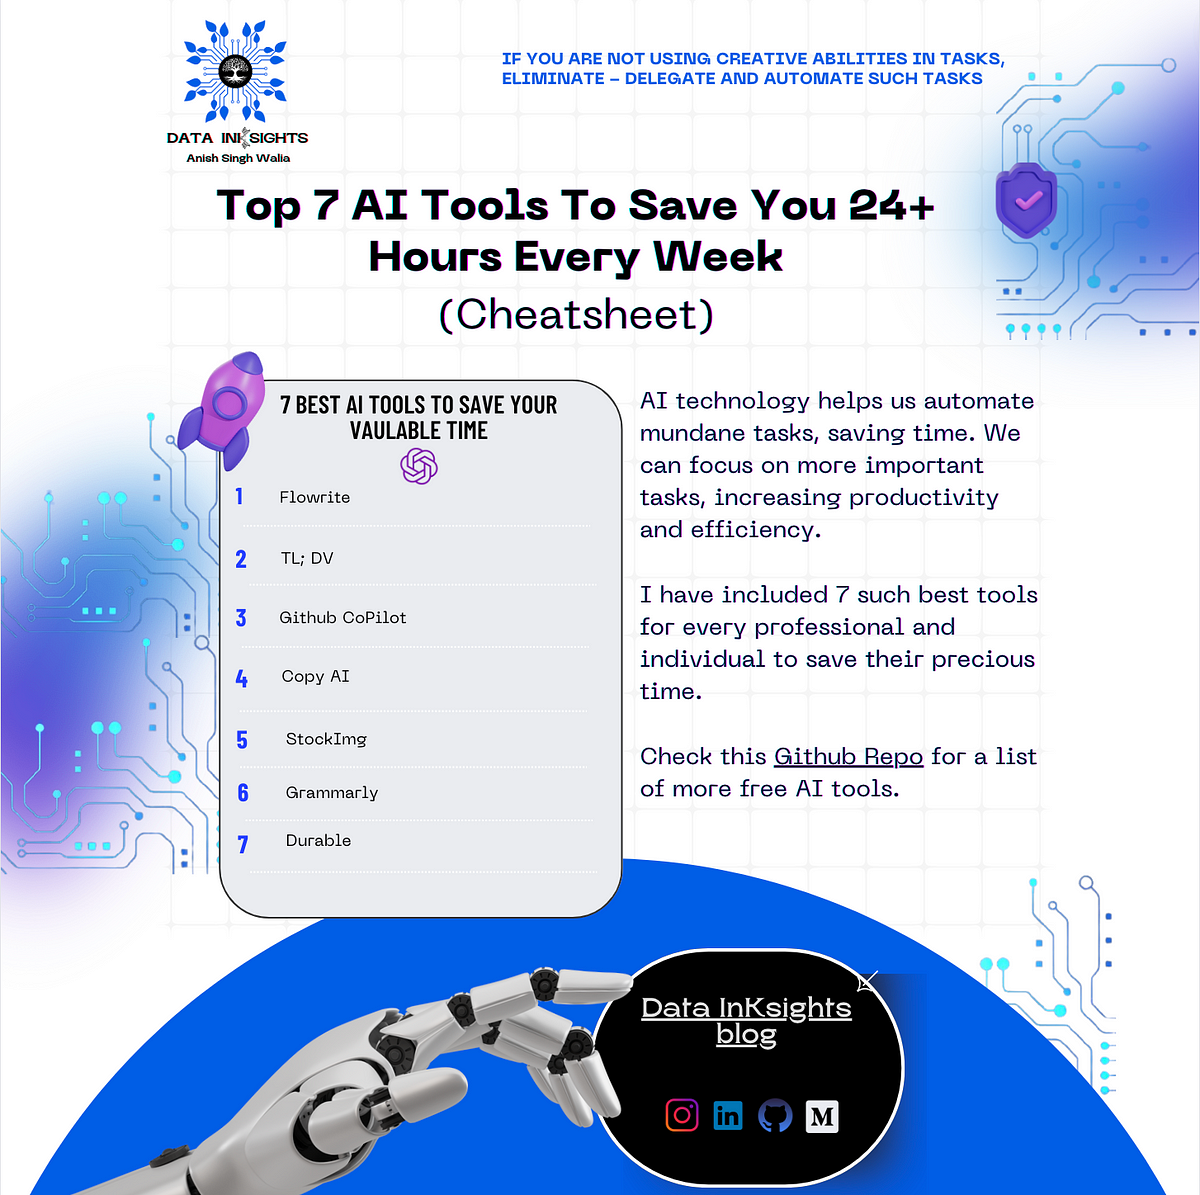 Top 7 AI Tools To Save You 24+ Hours Every Week